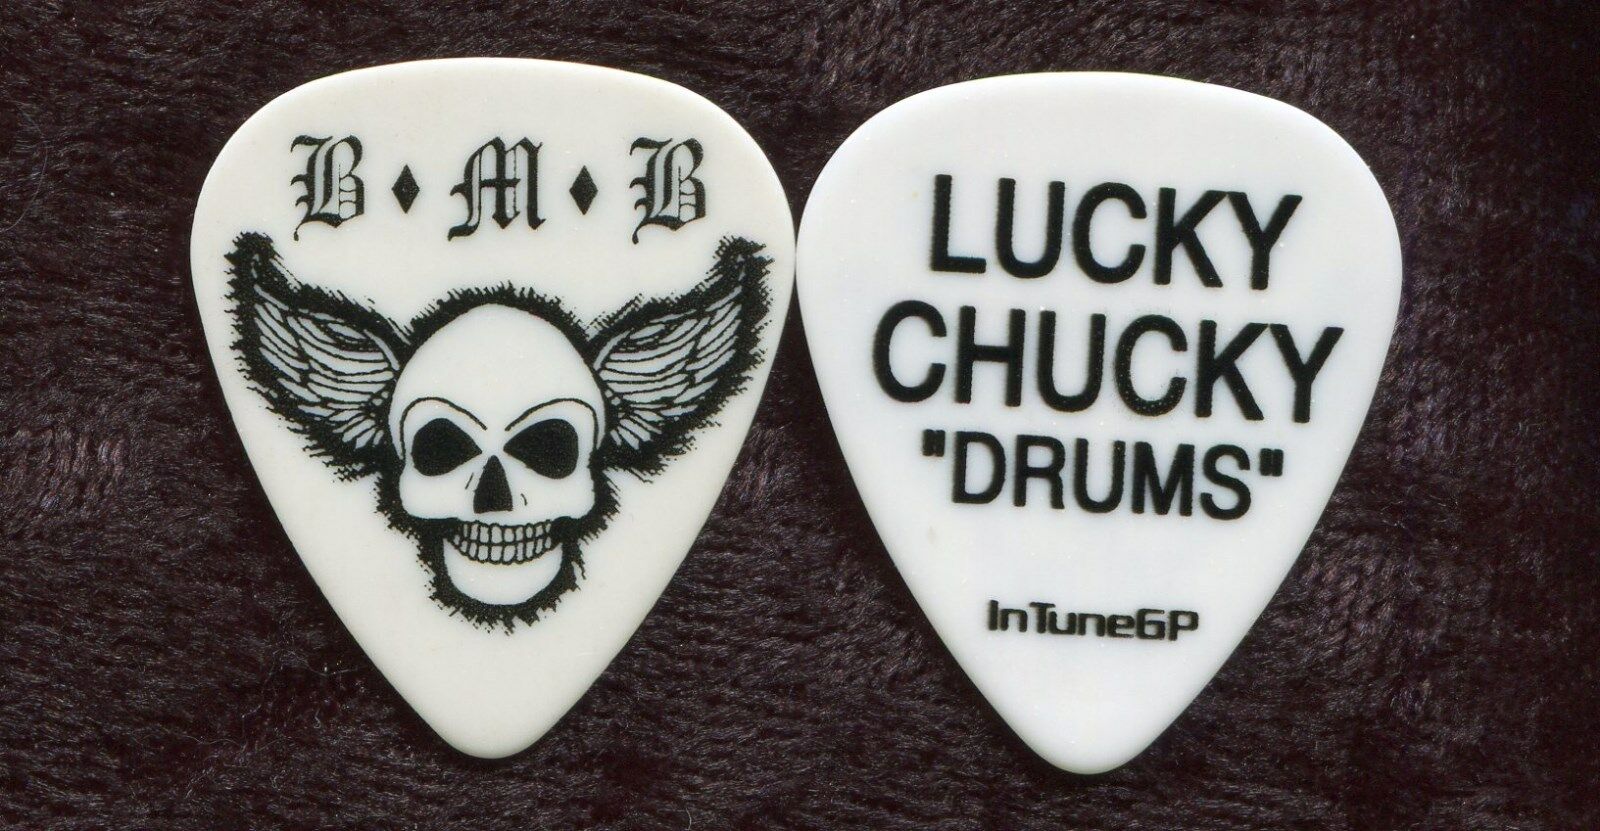 Bret Michaels Band Tour Guitar Pick!!! Lucky Chucky Custom Concert Stage Poison